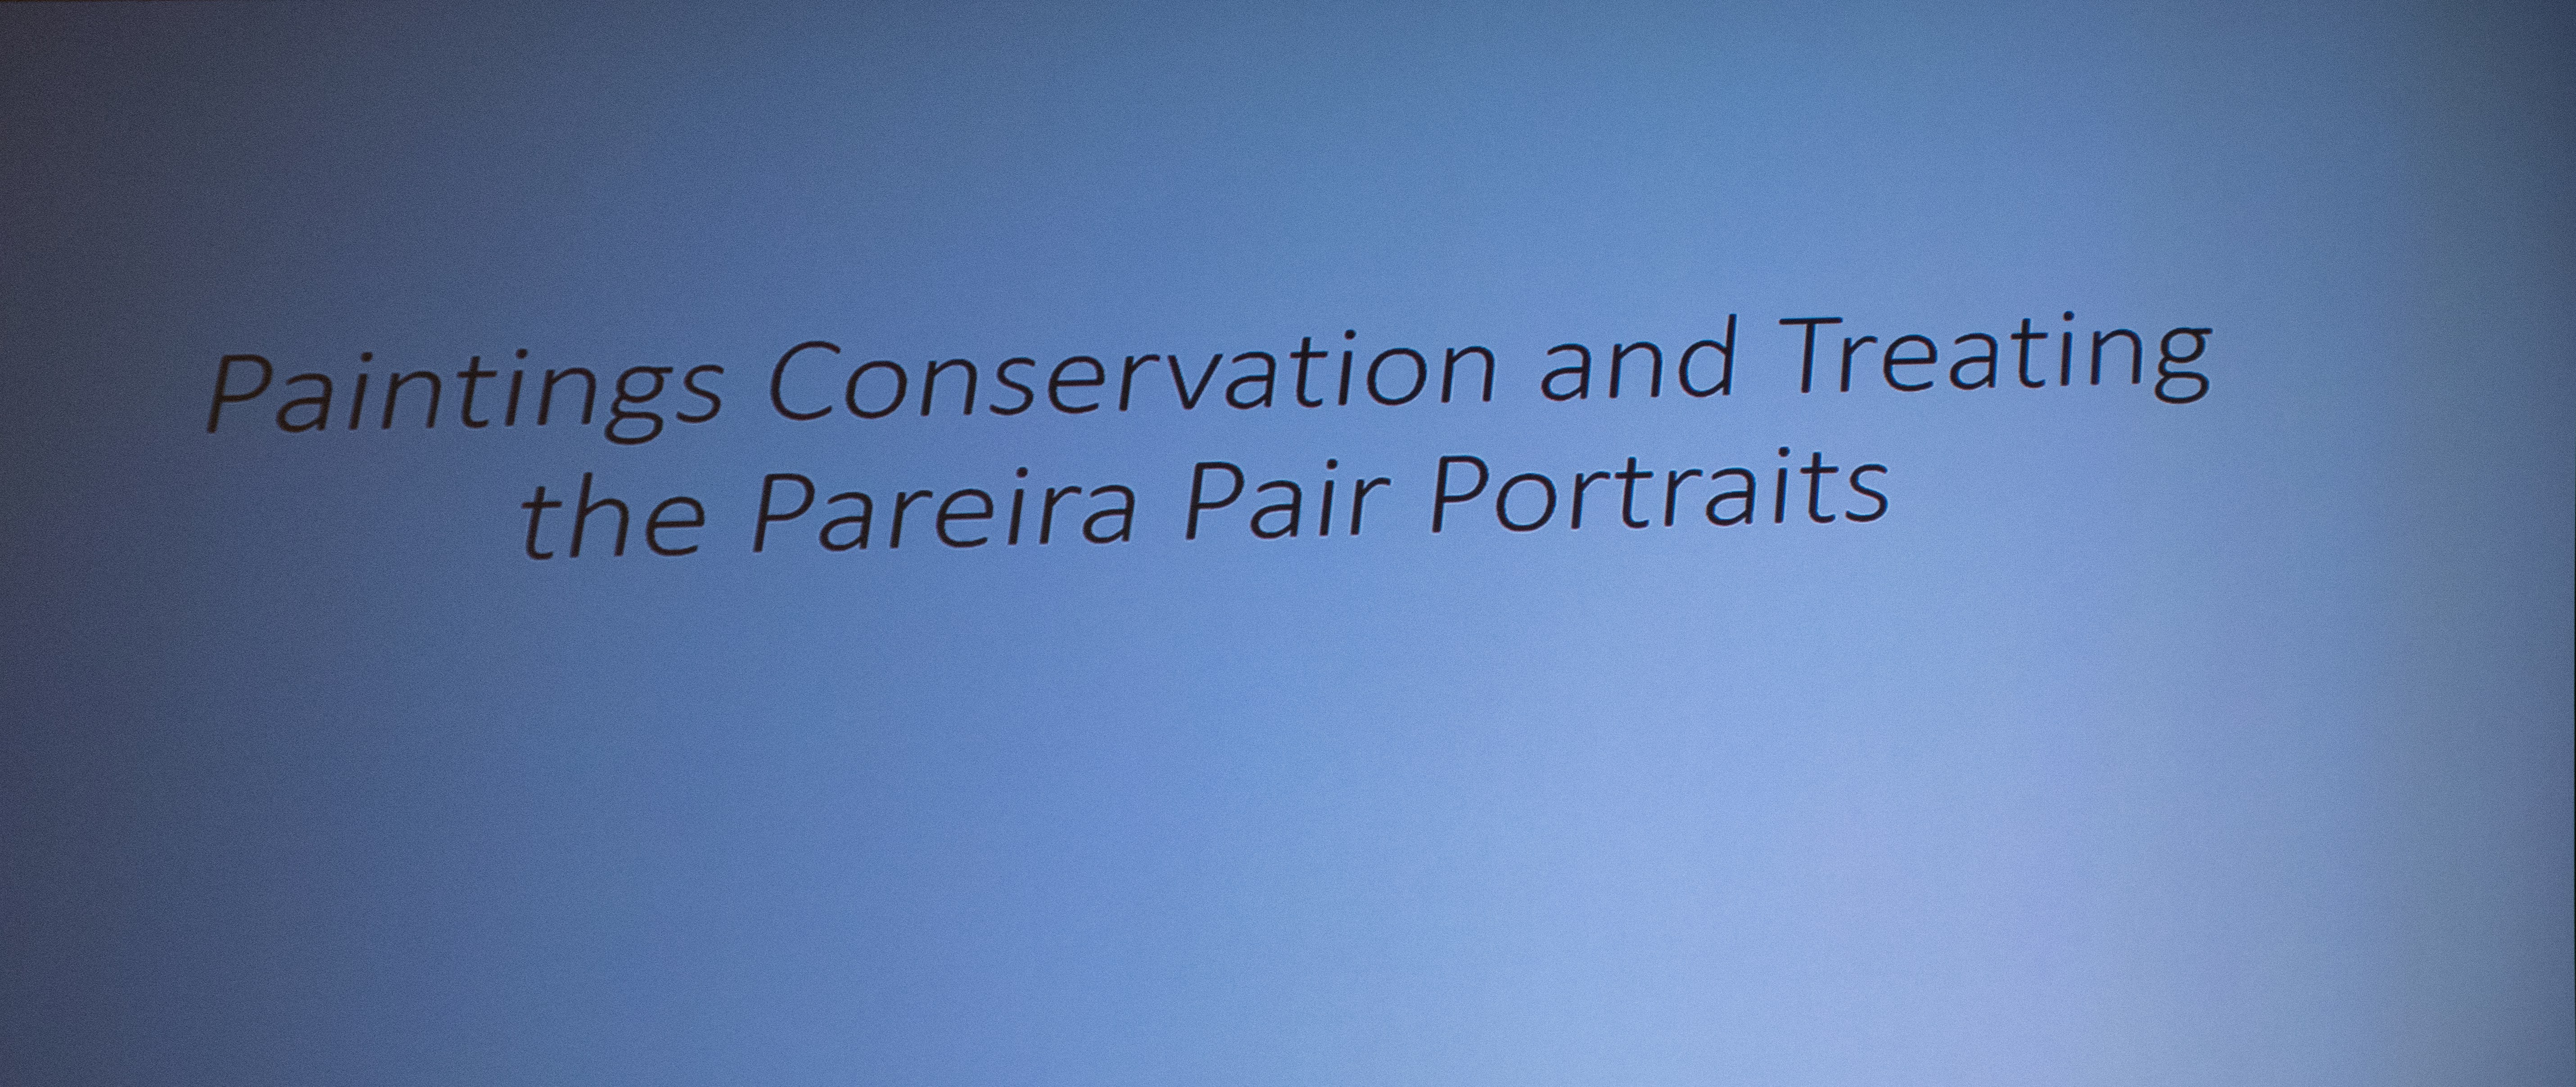 Paintings Conservation and Treating the Pareira Pair Portraits